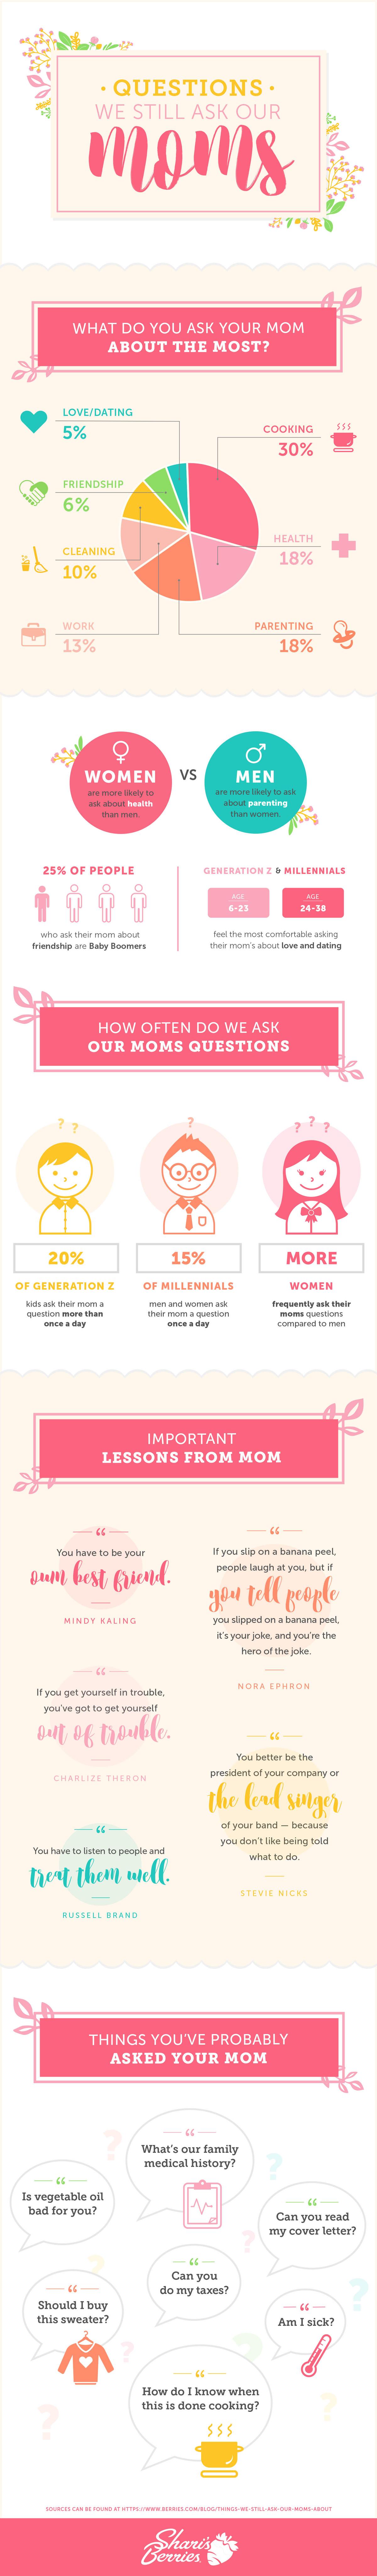 questions for mom in an infographic for Mother's Day